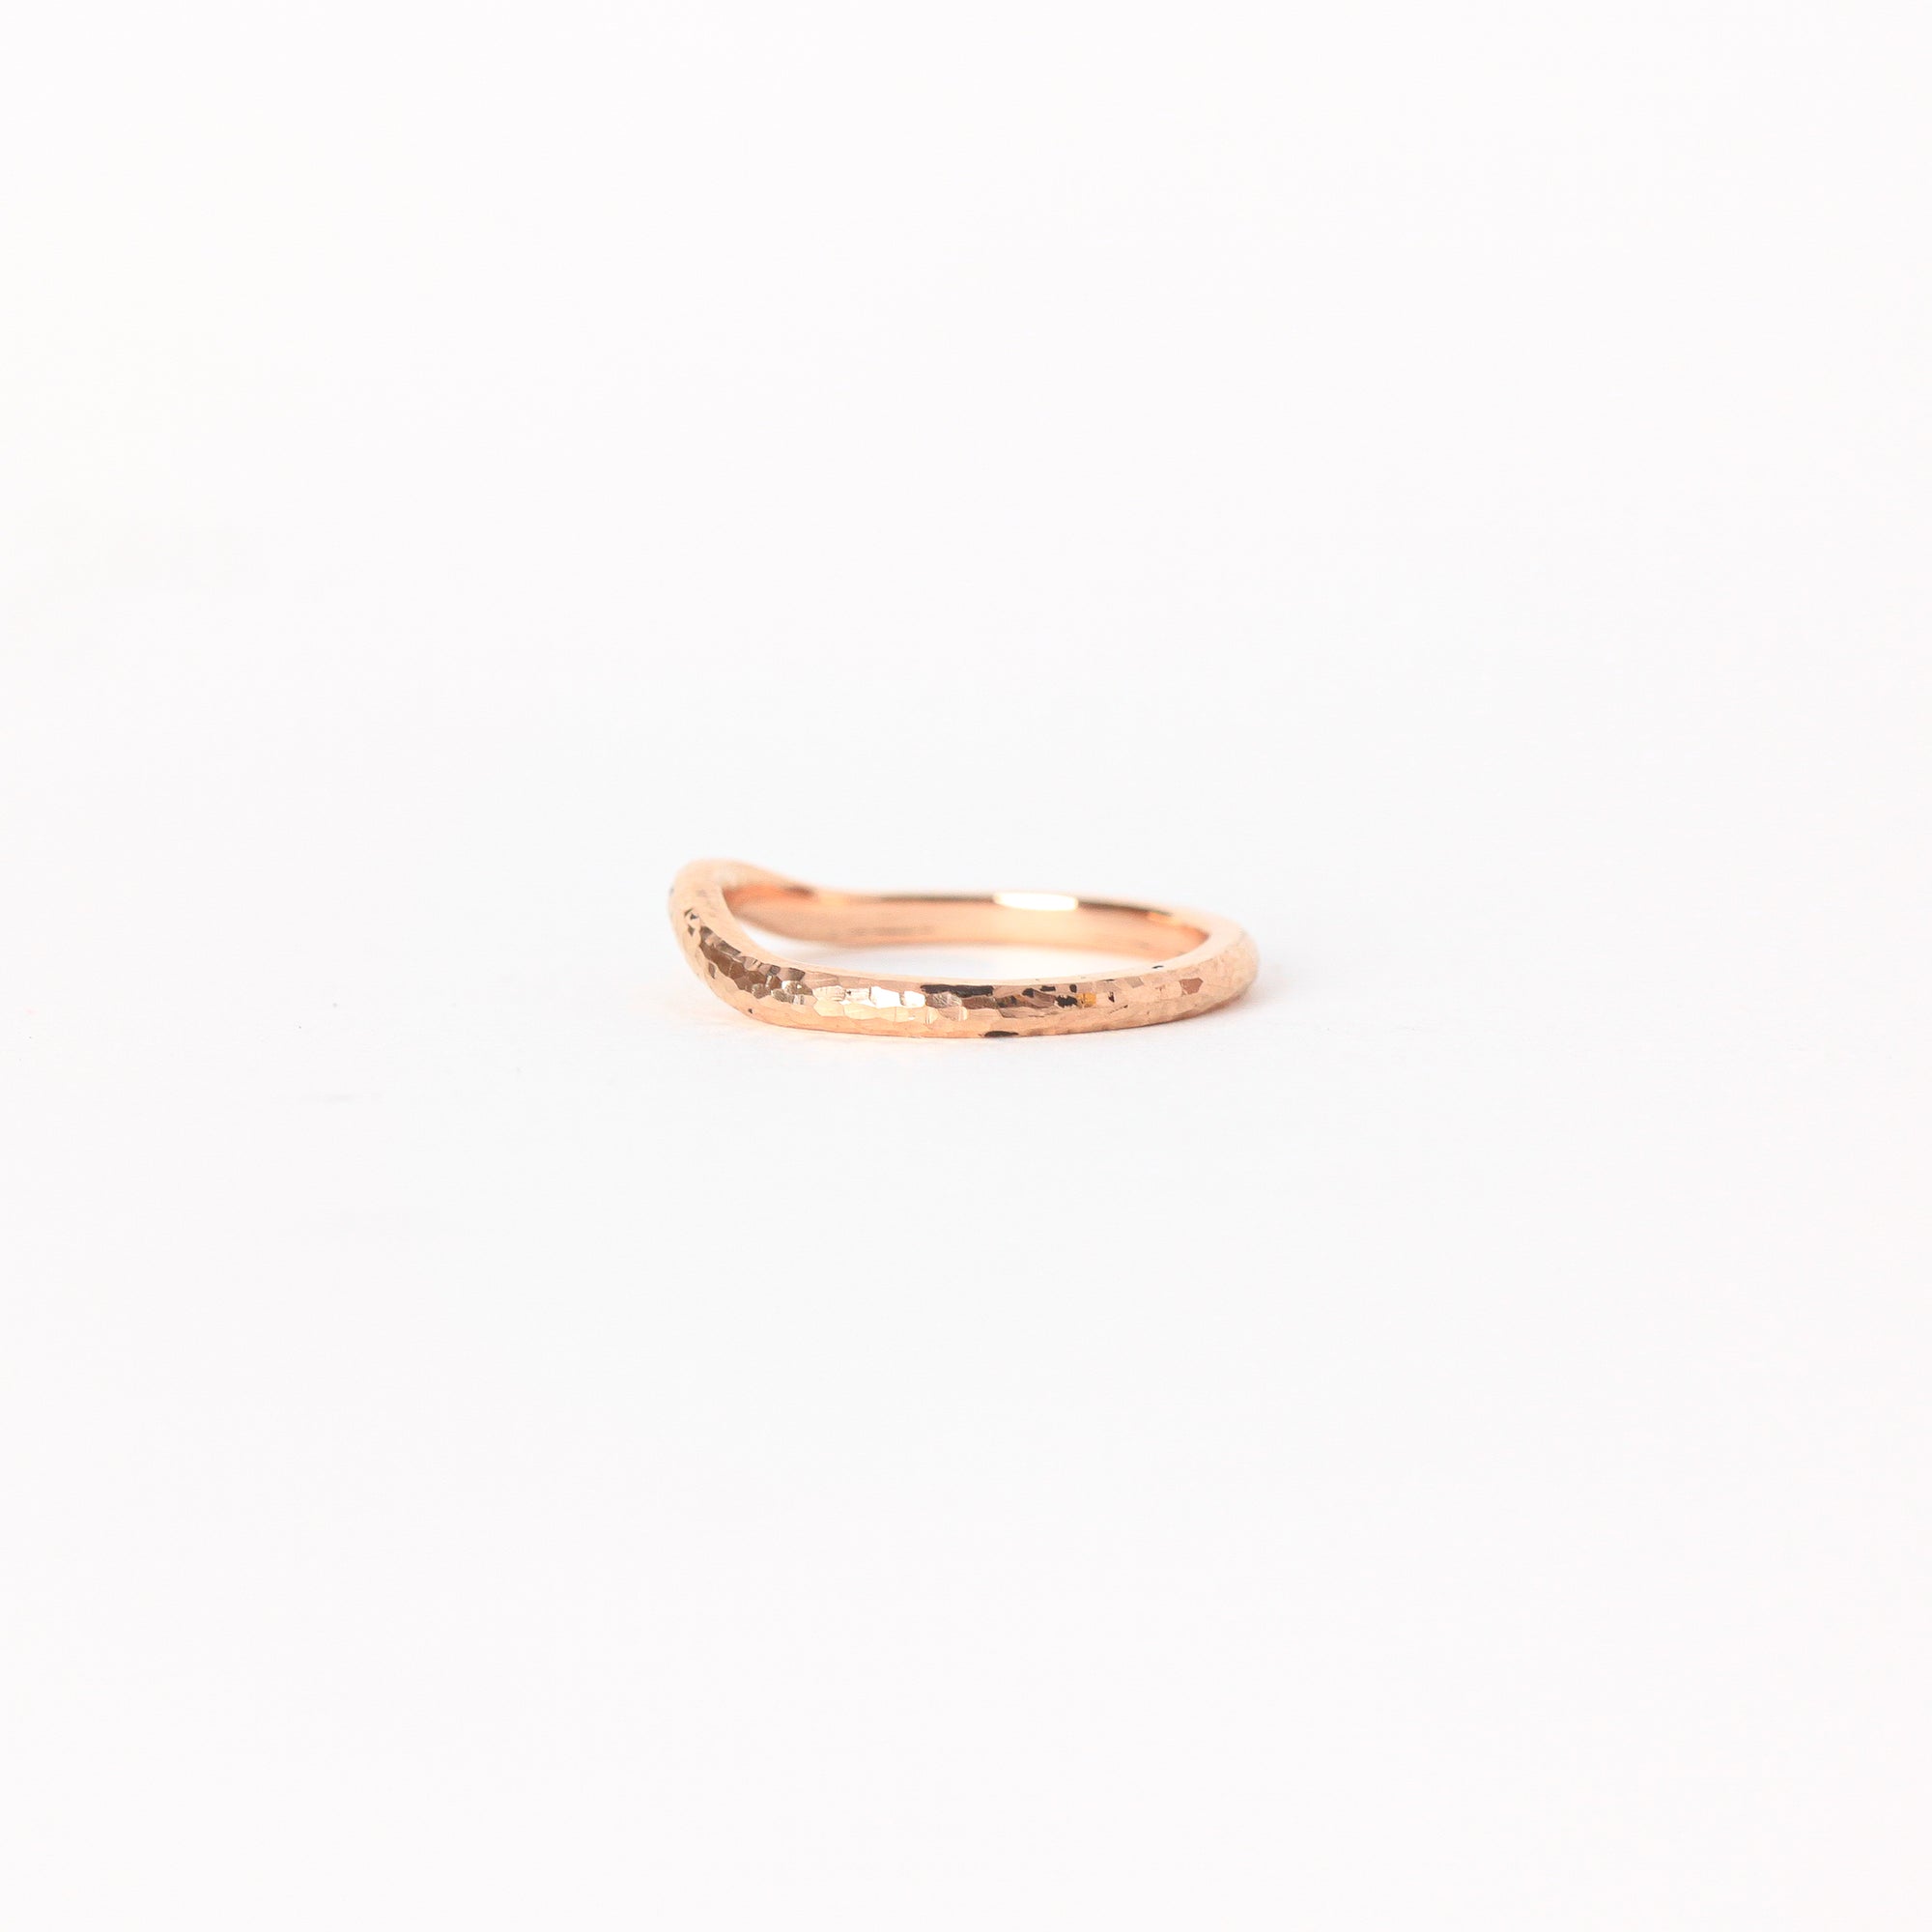 Handmade 18ct Rose Gold Curved Wedding Band